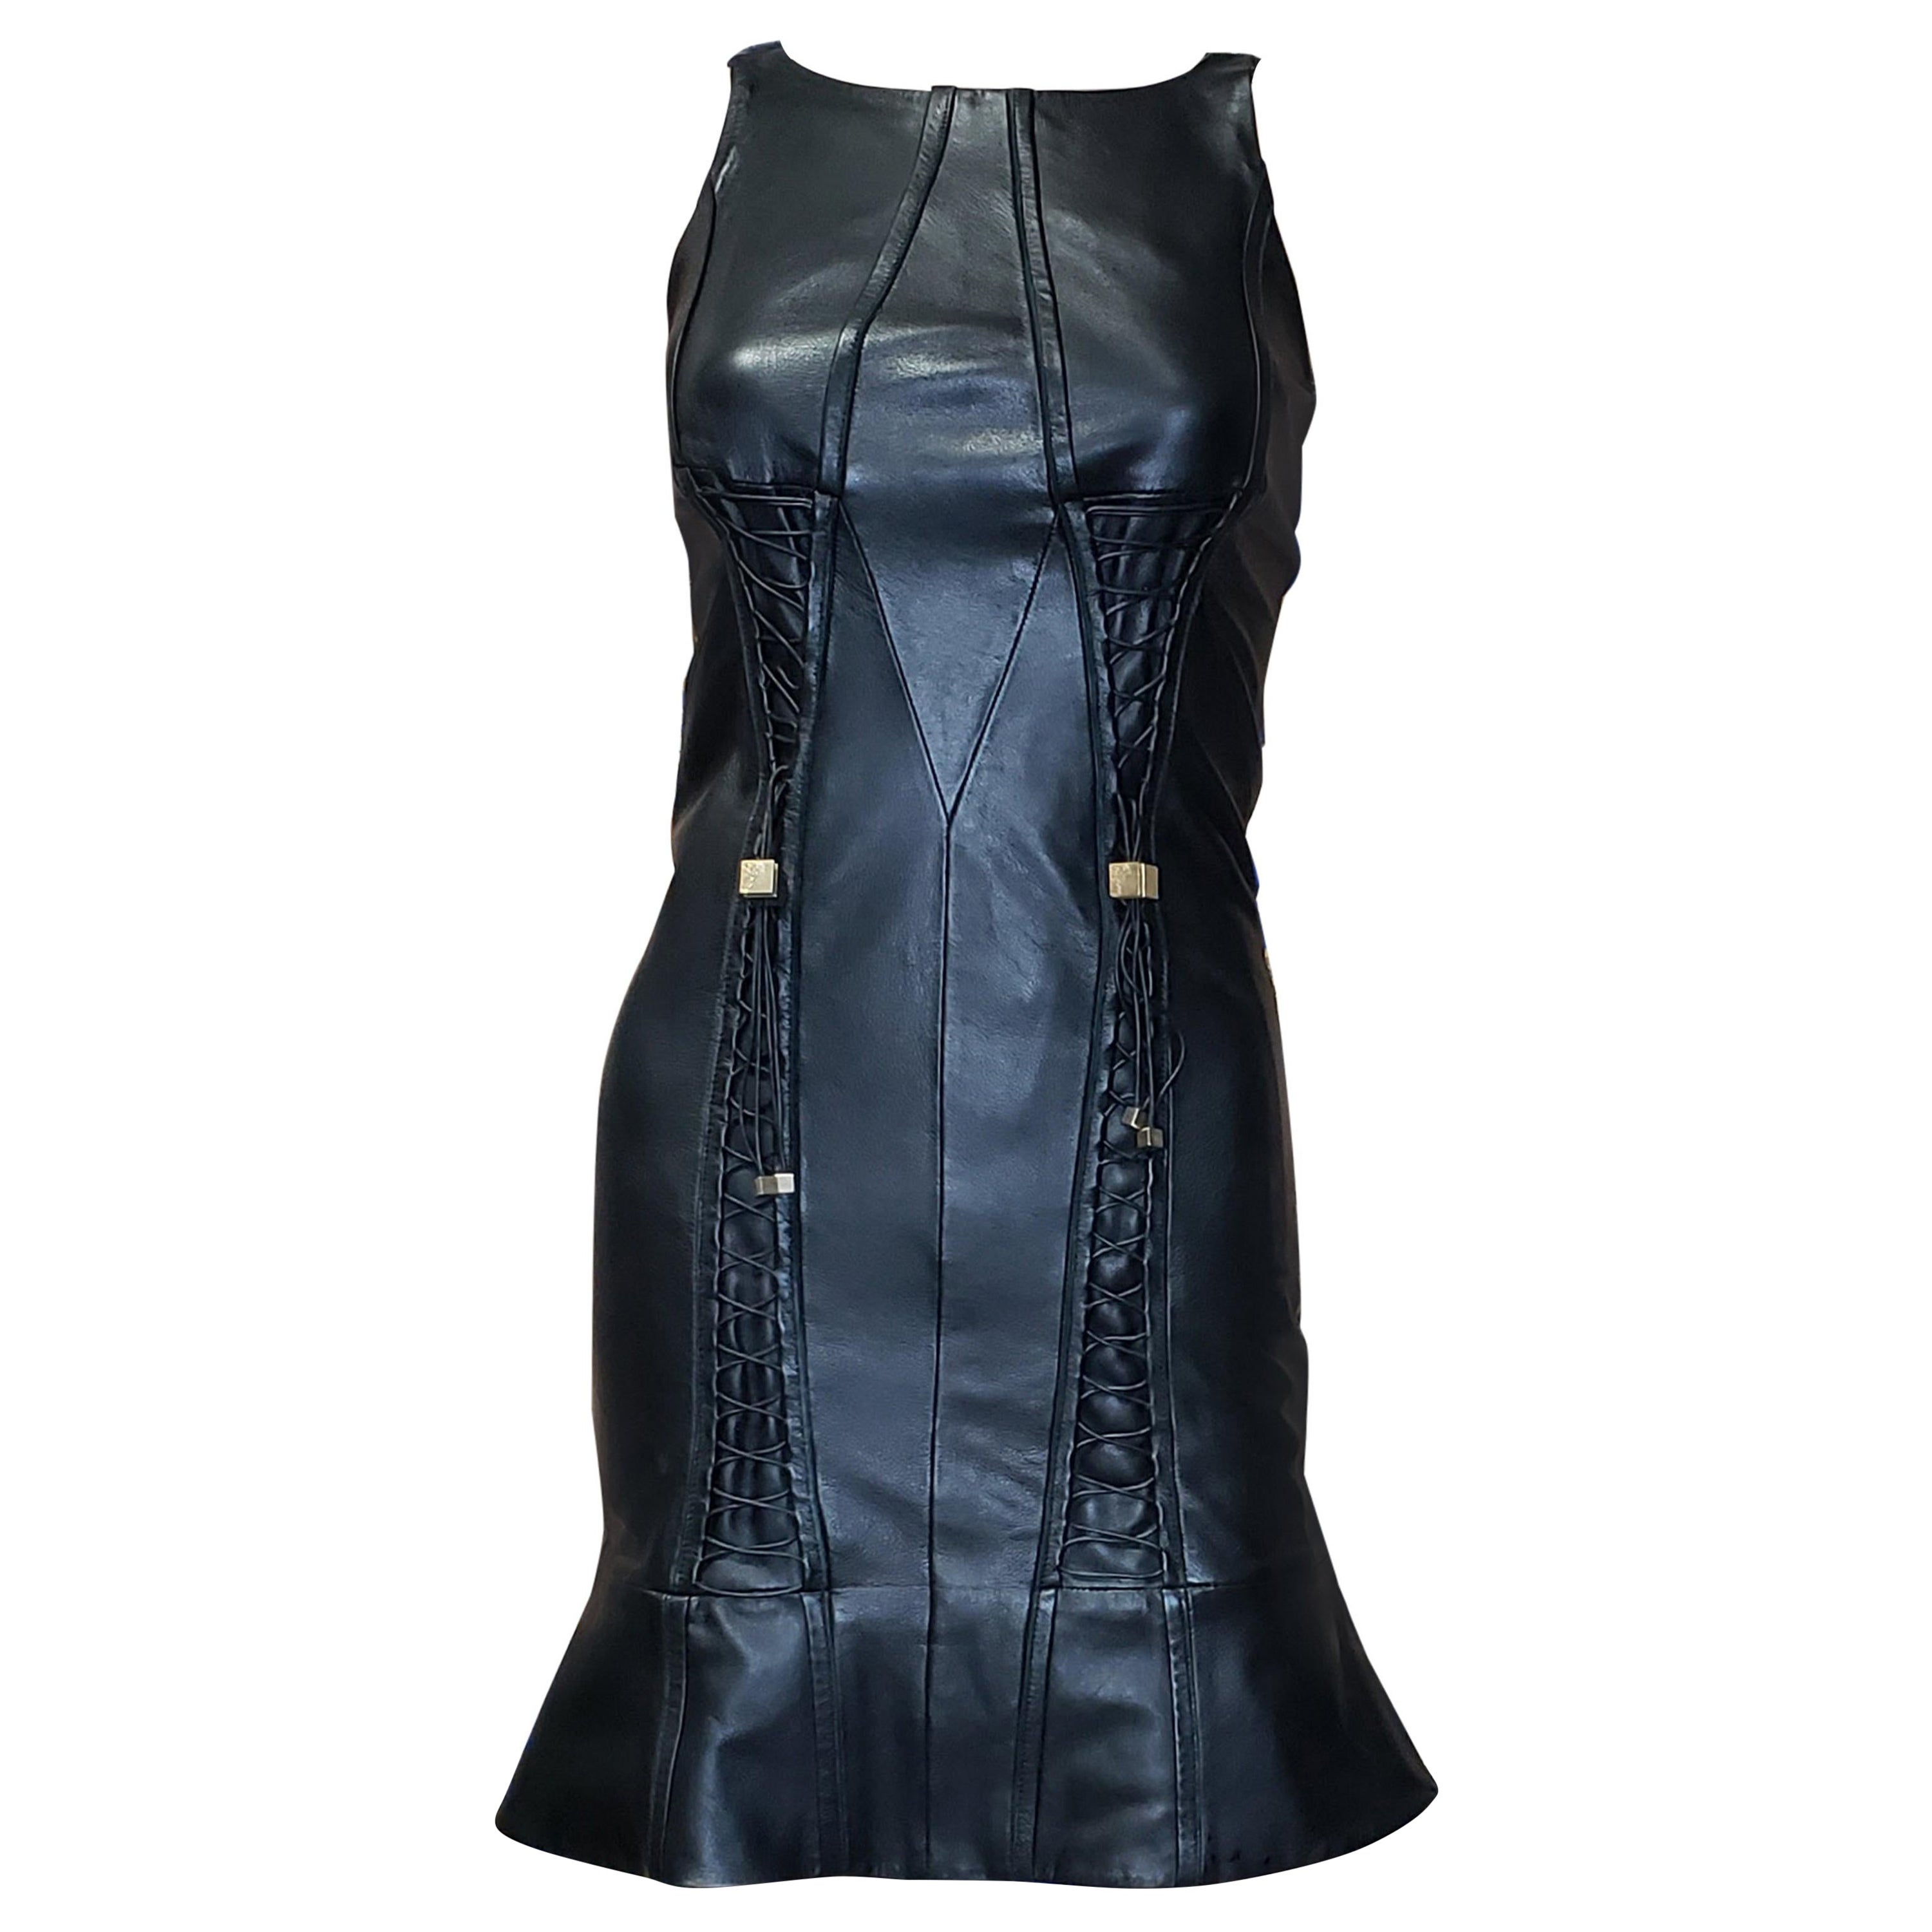 VERSACE BLACK LEATHER DRESS with TASSELS 38 - 4 For Sale